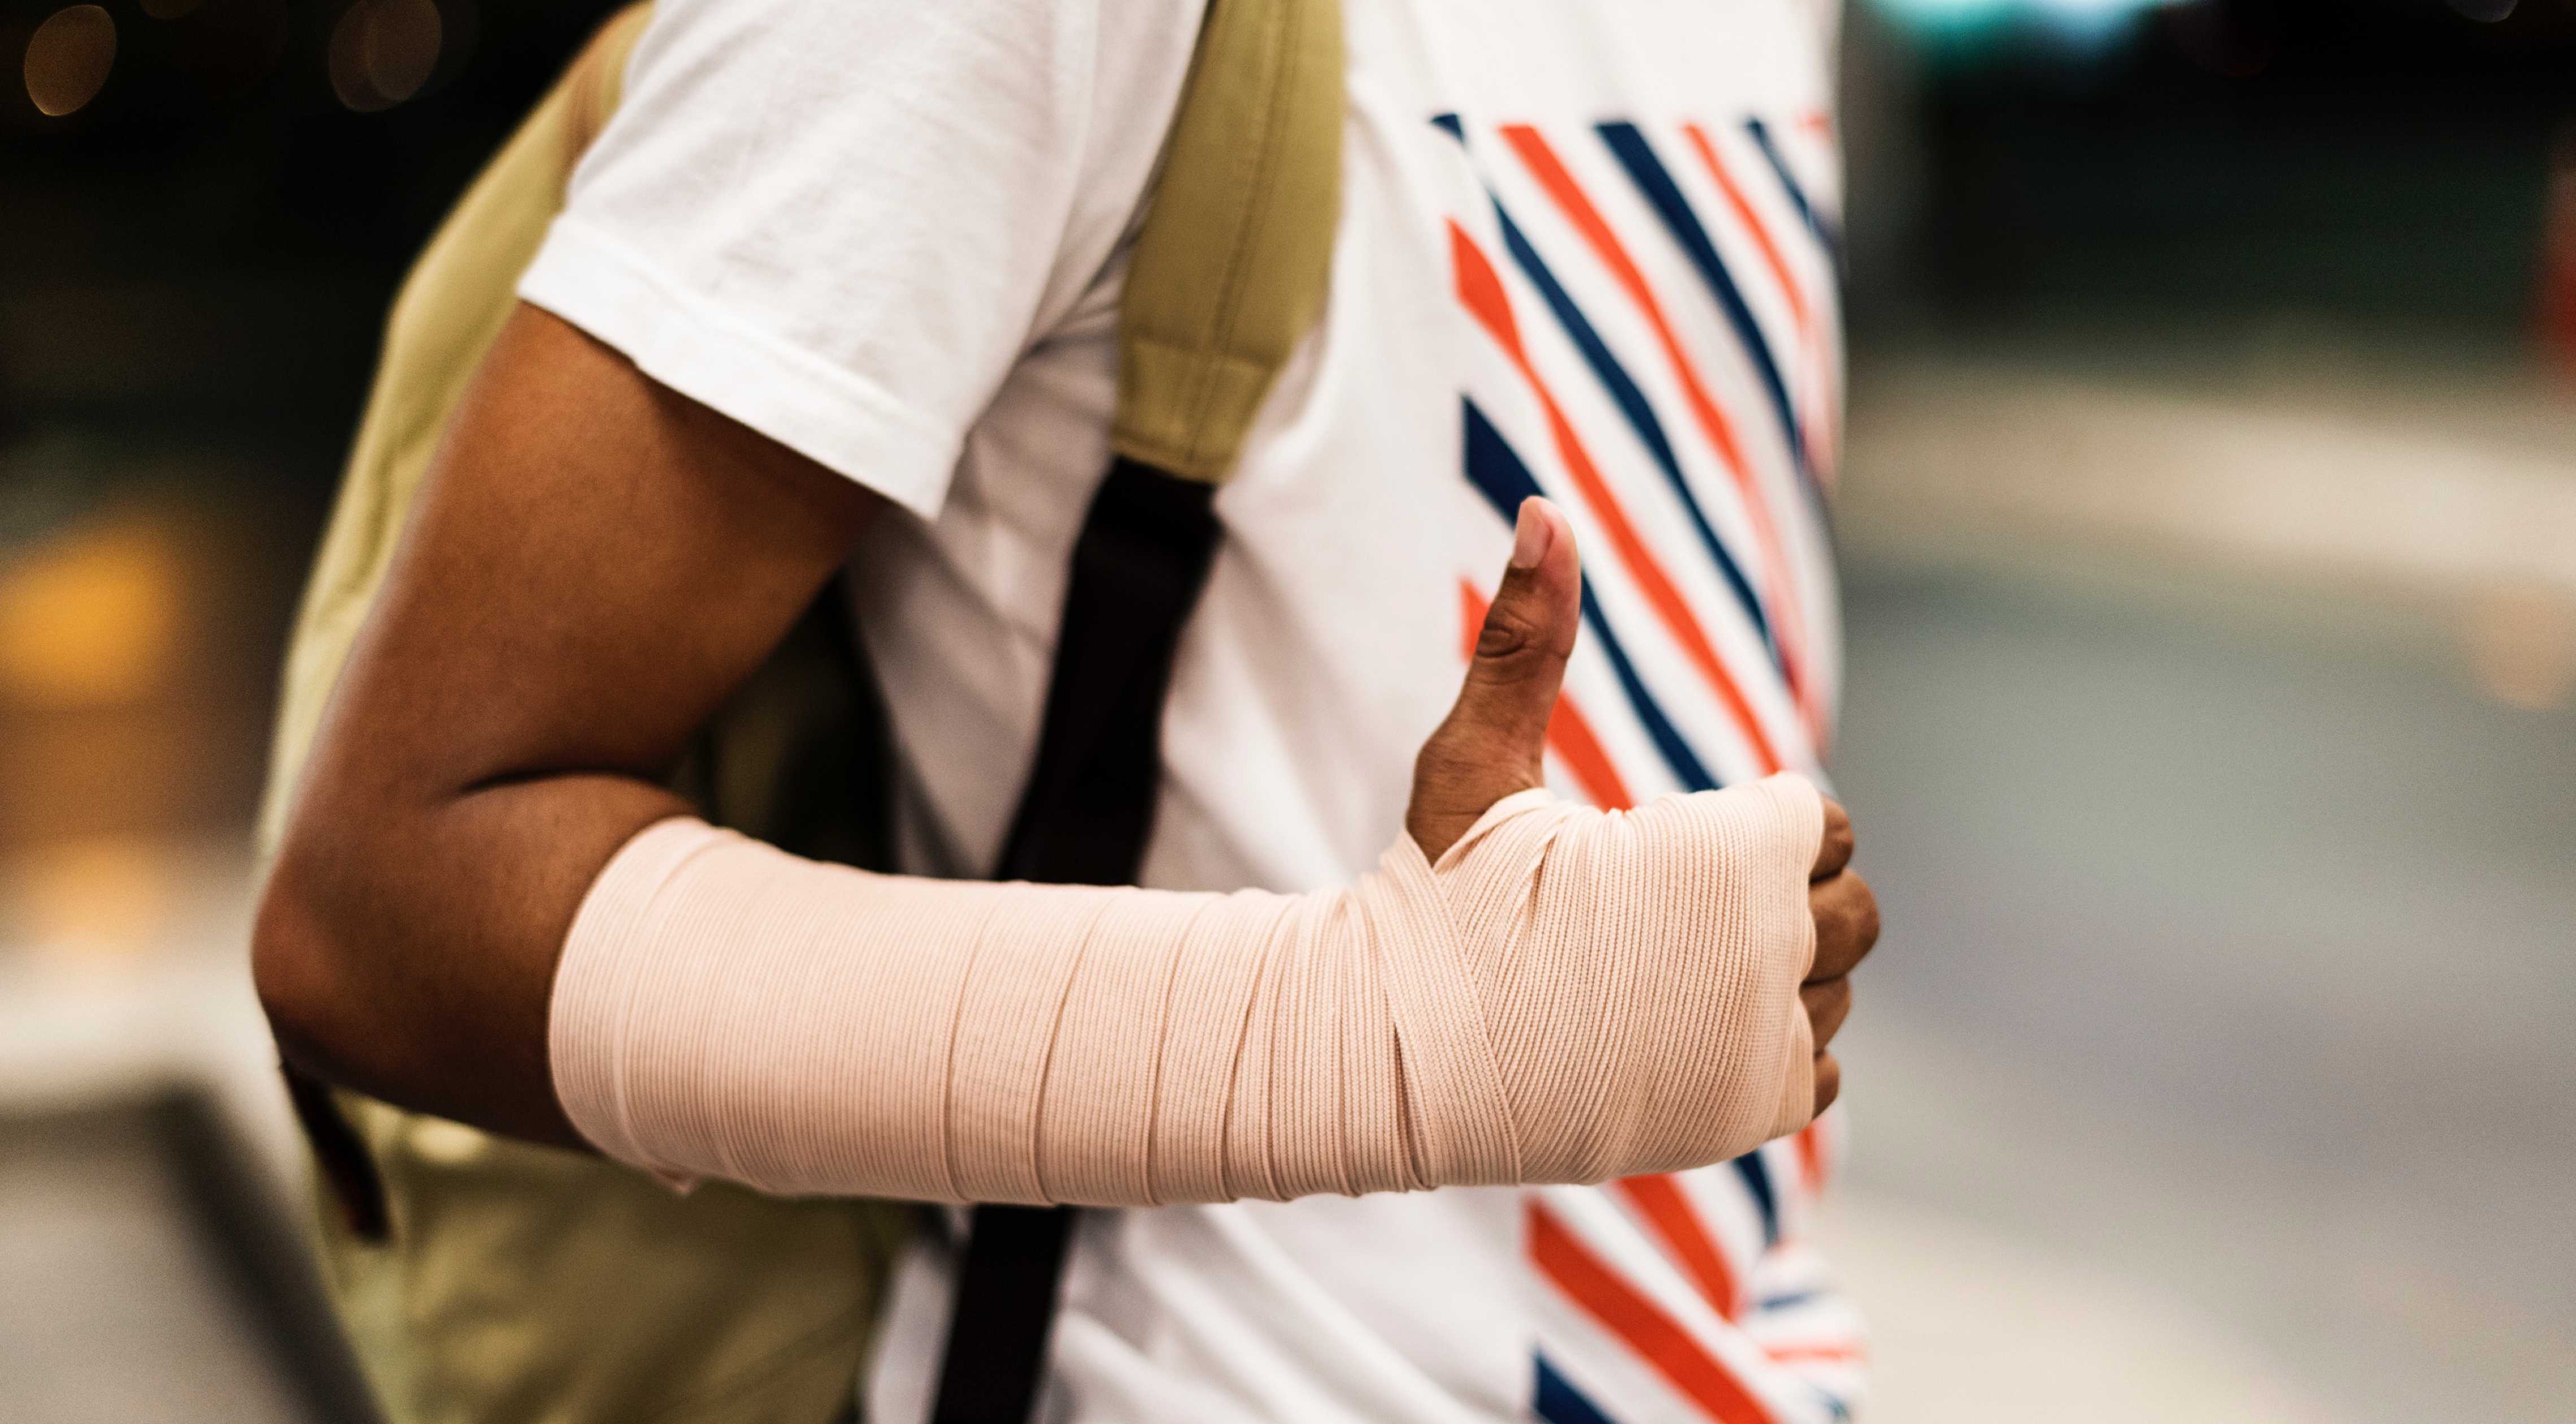 Closeup of a broken arm of a user of the incident reporting app.